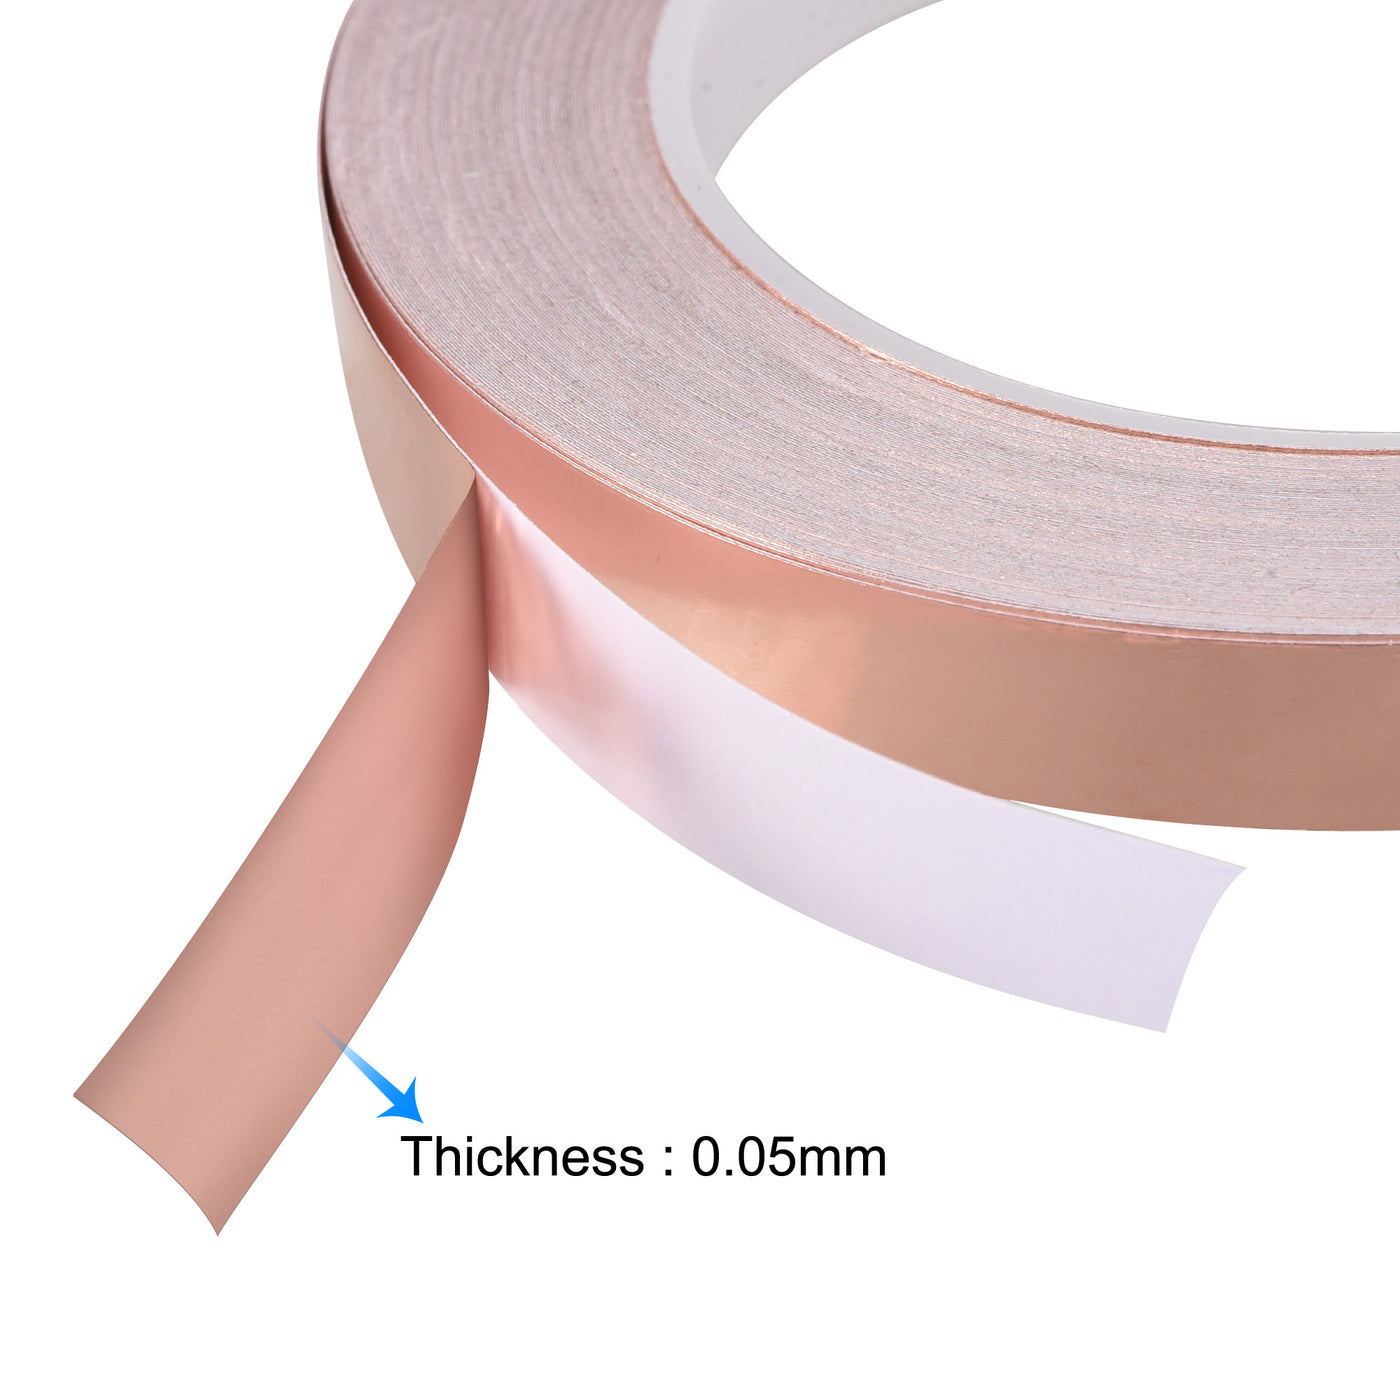 uxcell Uxcell Single-Sided Conductive Tape Copper Foil Tape 20mm x 30m/98.4ft 1pcs